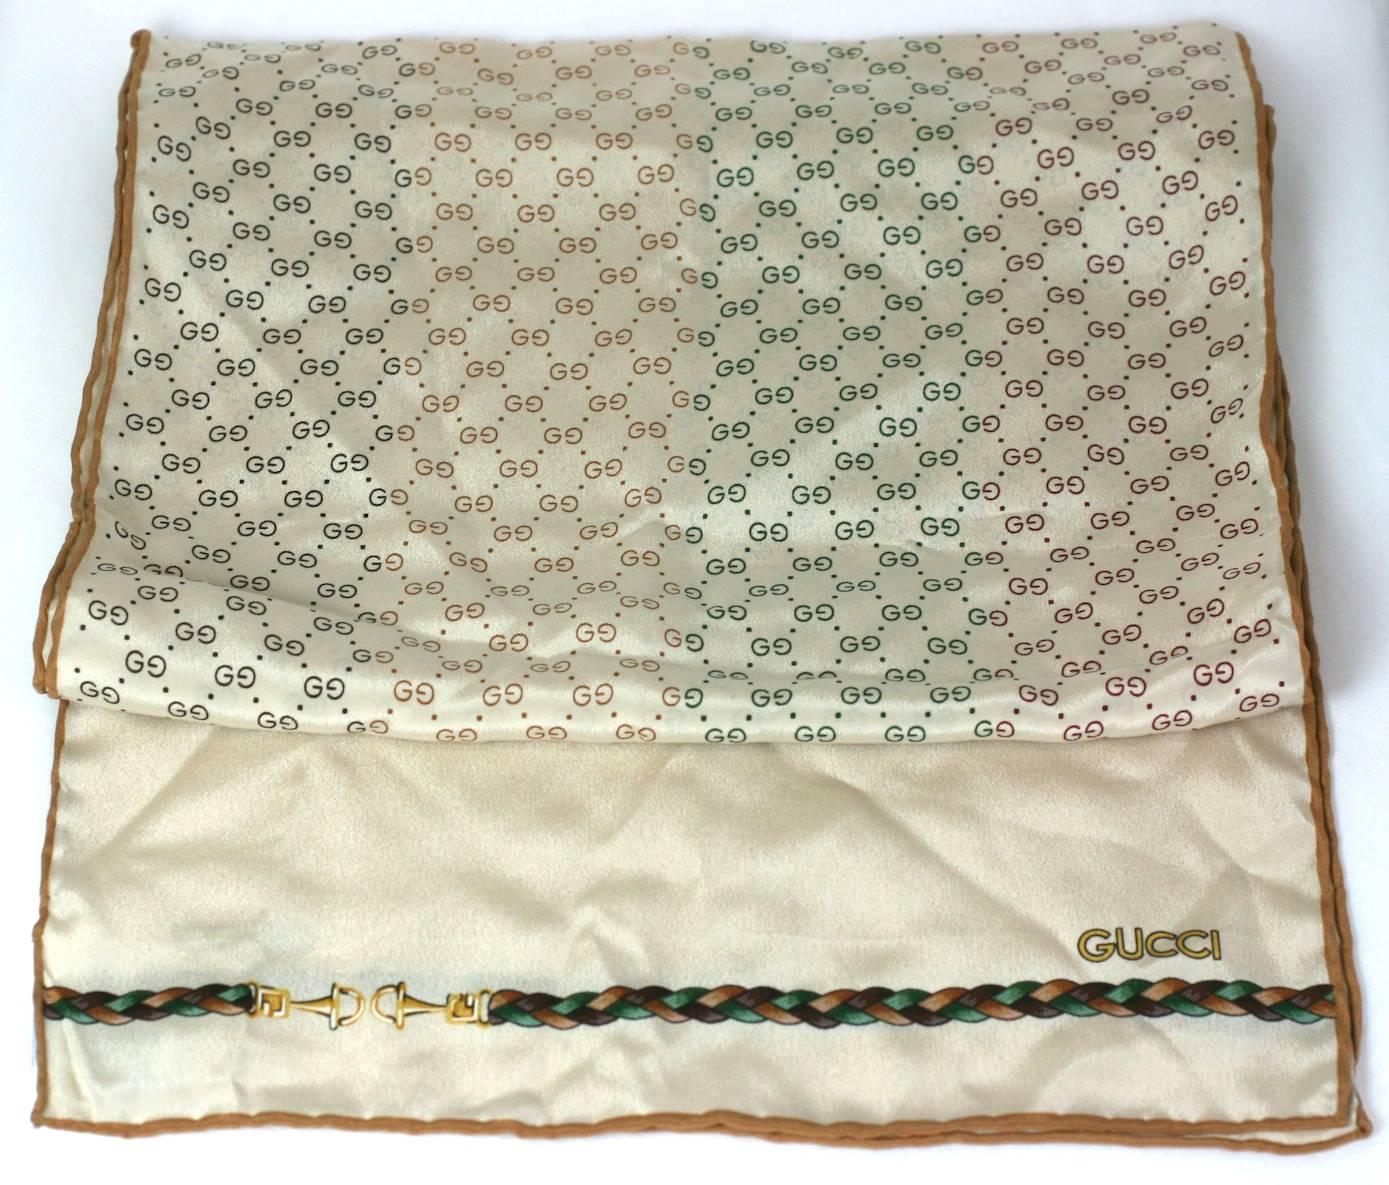 Gucci silk crepe de chine scarf with colorful GG logos in tonal stripes of brown, maroon, and deep green running the length of fabric. 
A braided design with horse bits decorates the ends of the scarf. 1970's Italy.
Hand rolled finishes. Excellent